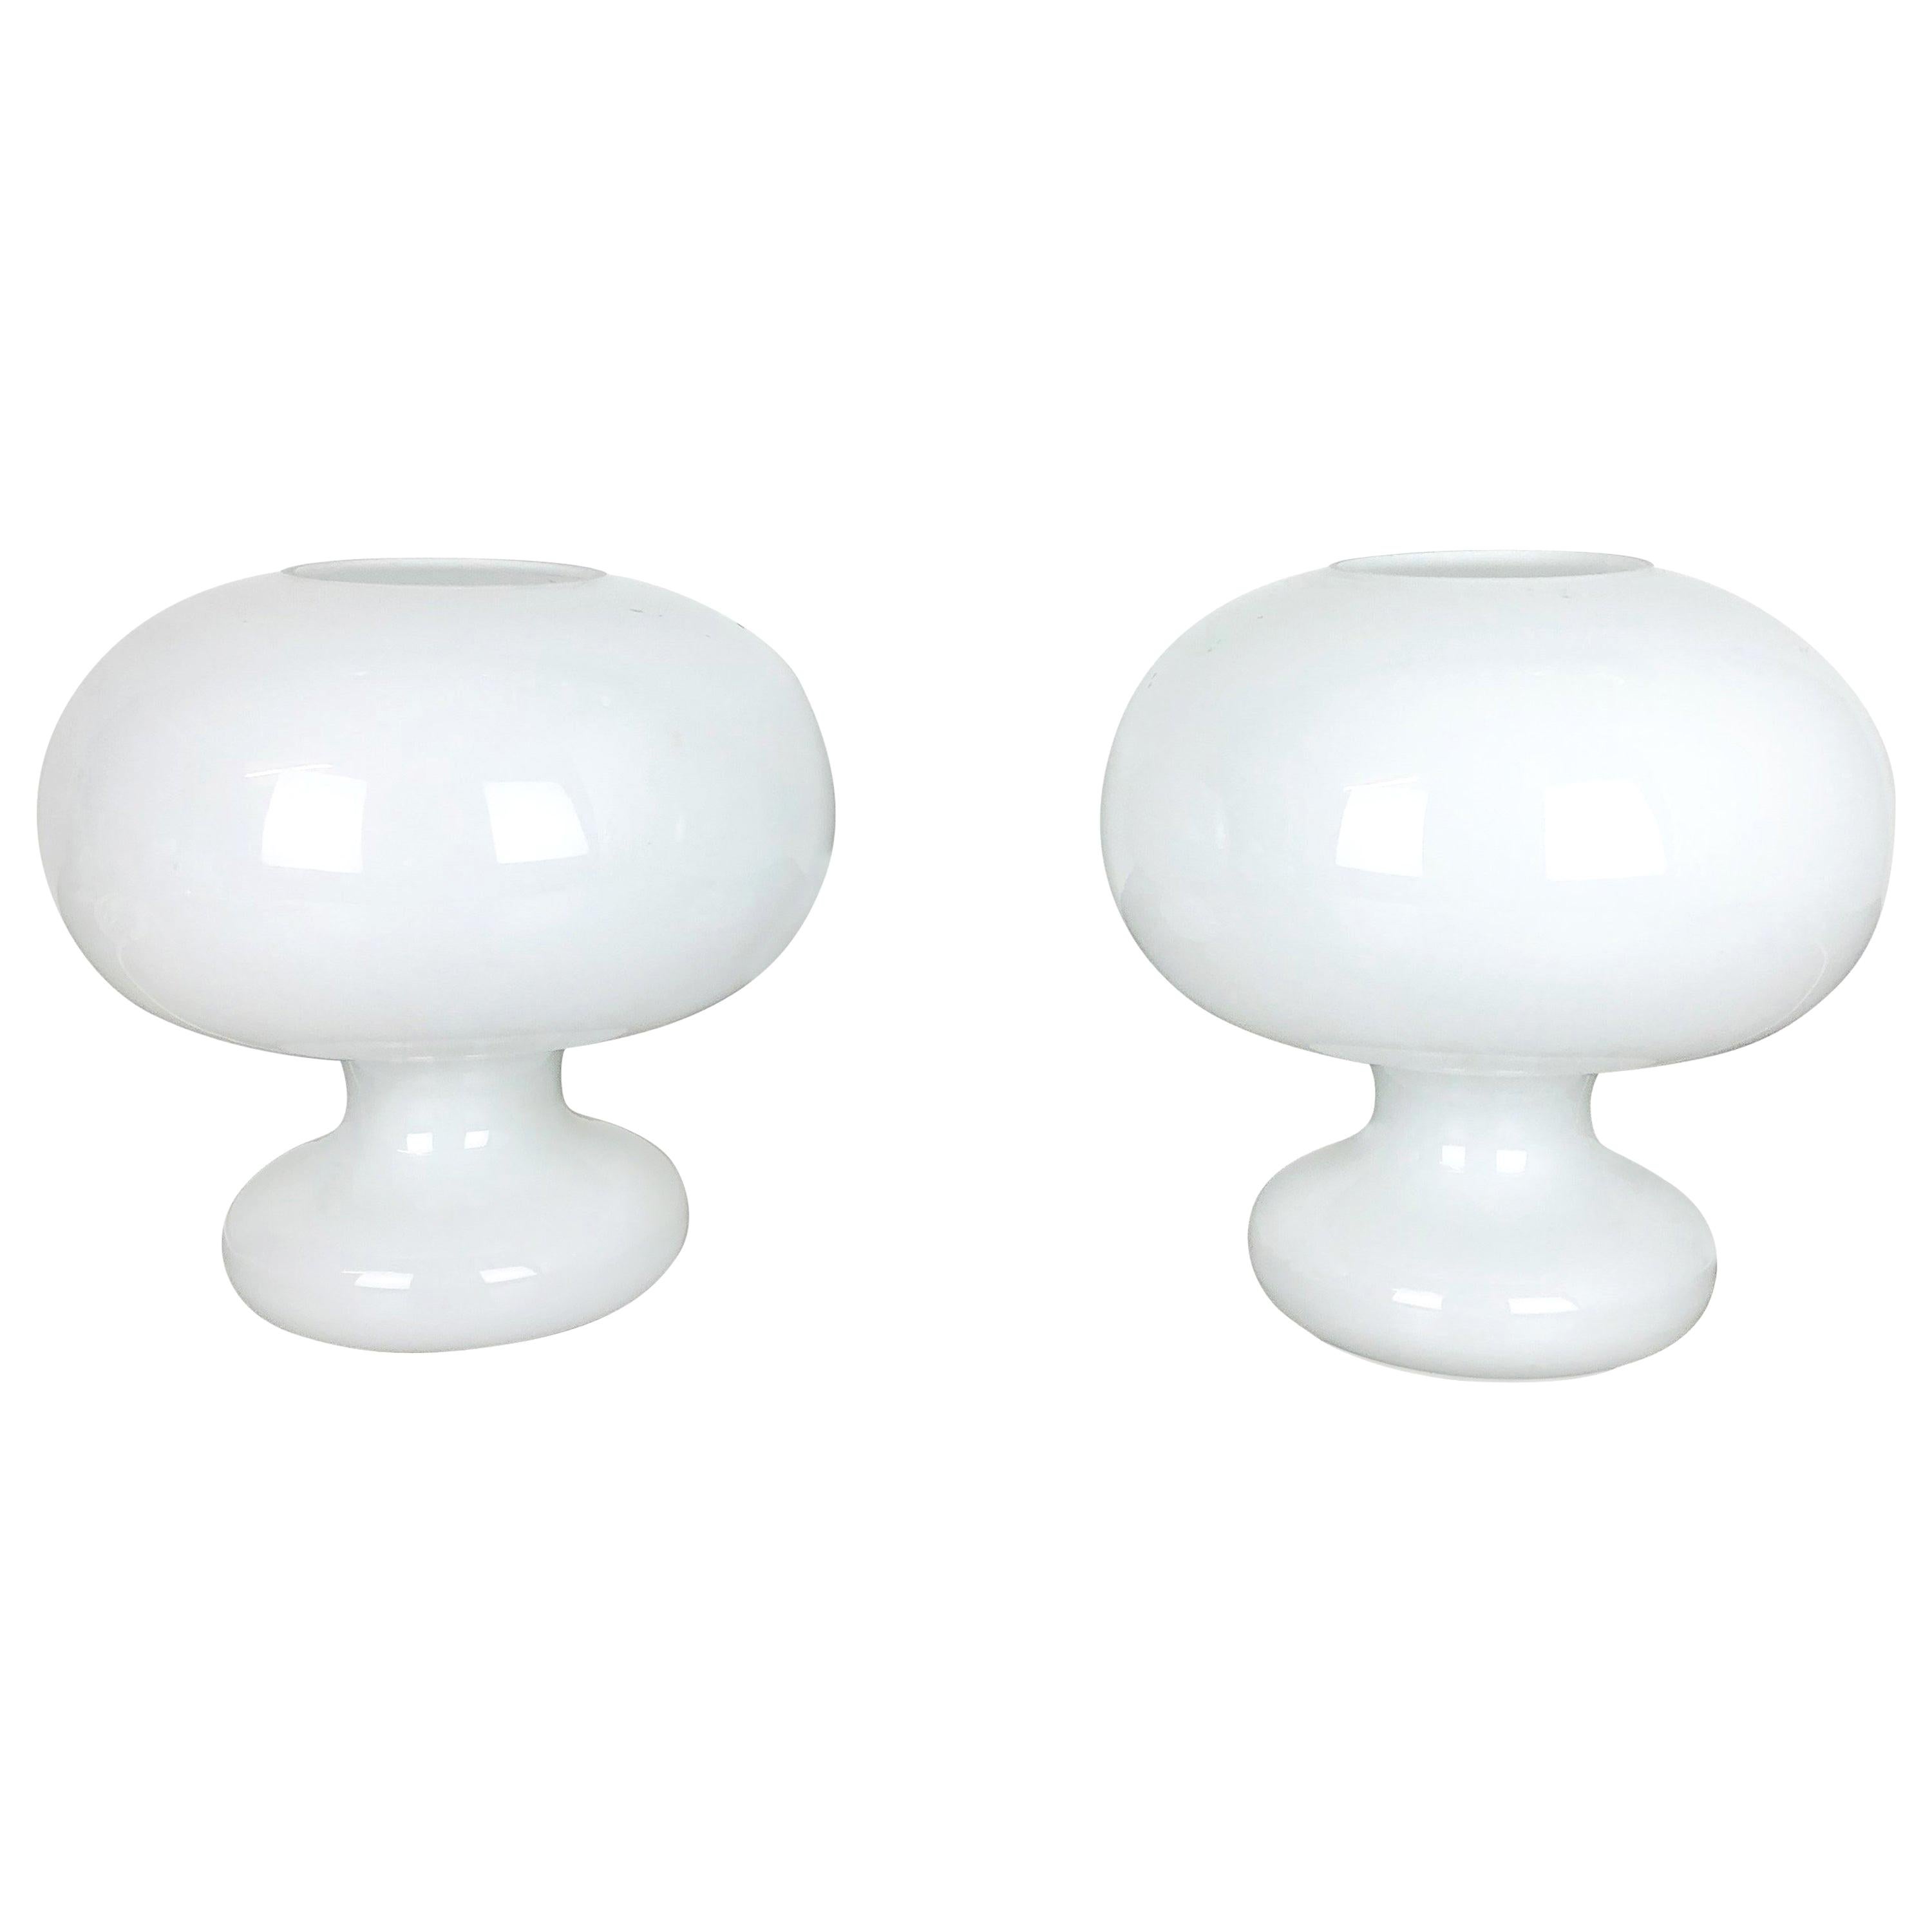 Set of 2 Original 1970s Glass "MUSHROOM" Table Light by Cosack Lights, Germany For Sale